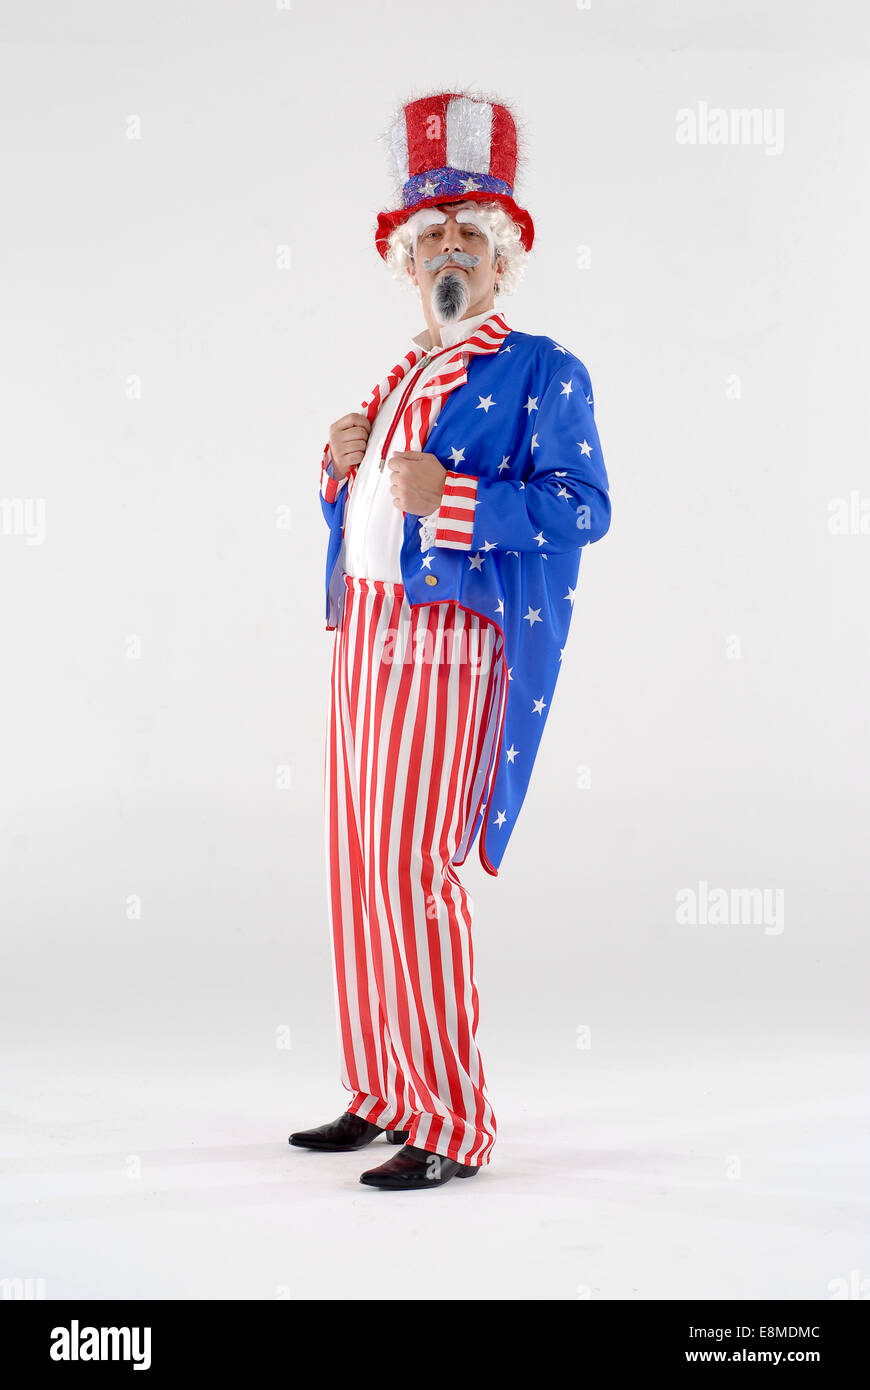 Man dressed as Uncle Sam in comedy fancy dress costume, with stars and stripes, top hat, tails and pants / trousers. USA. Stock Photo